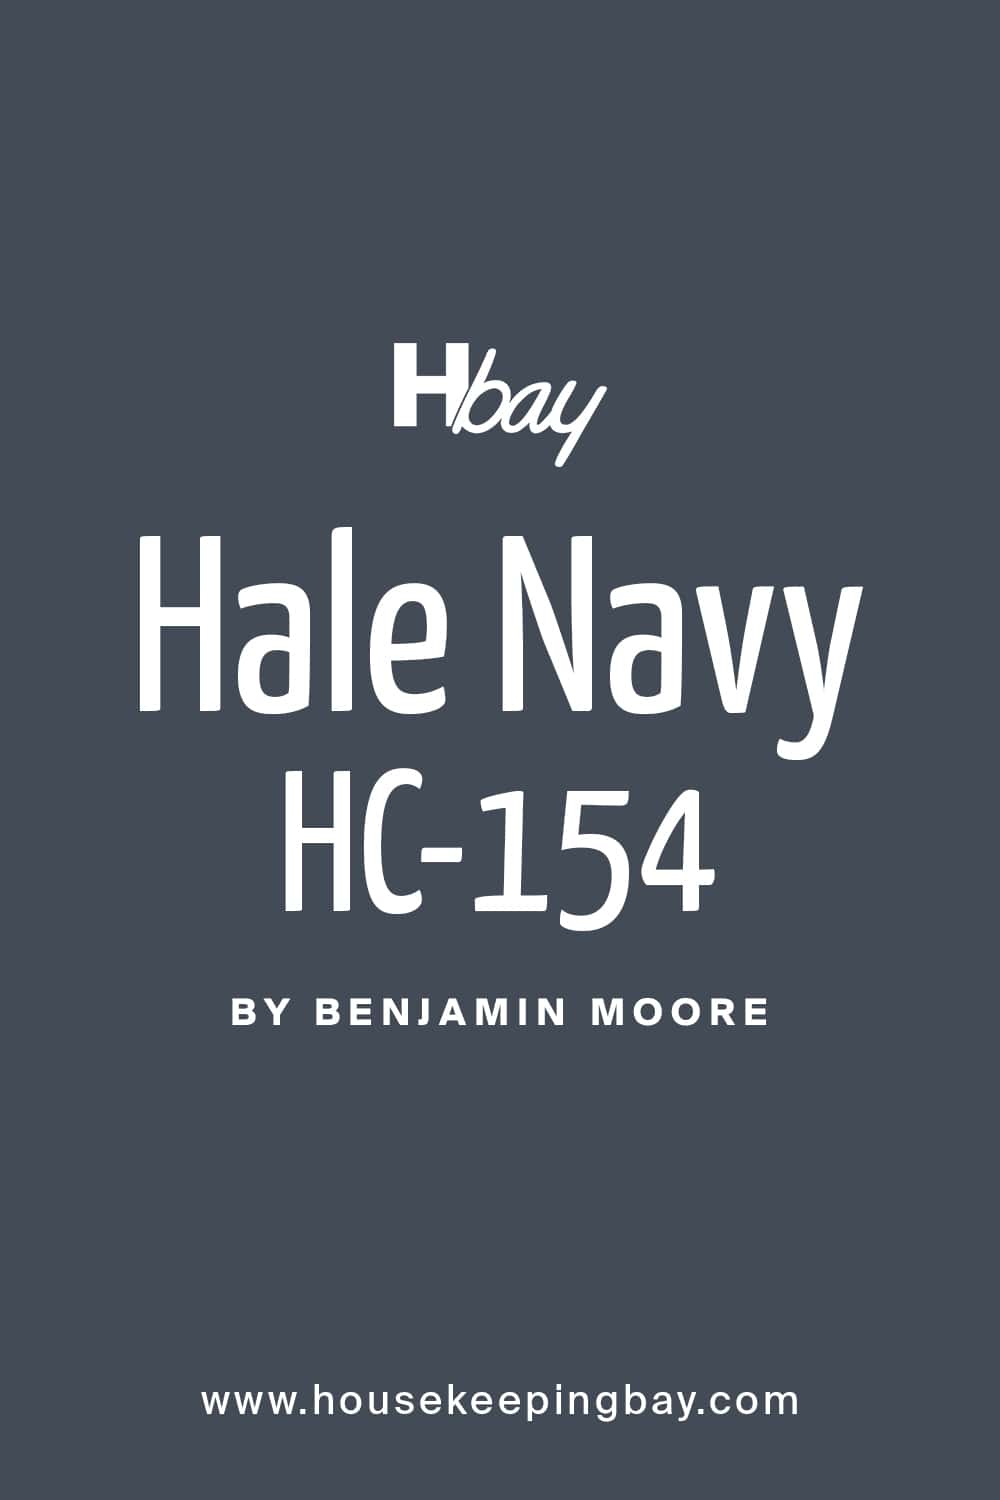 Hale Navy HC 154 Paint Color by Benjamin Moore